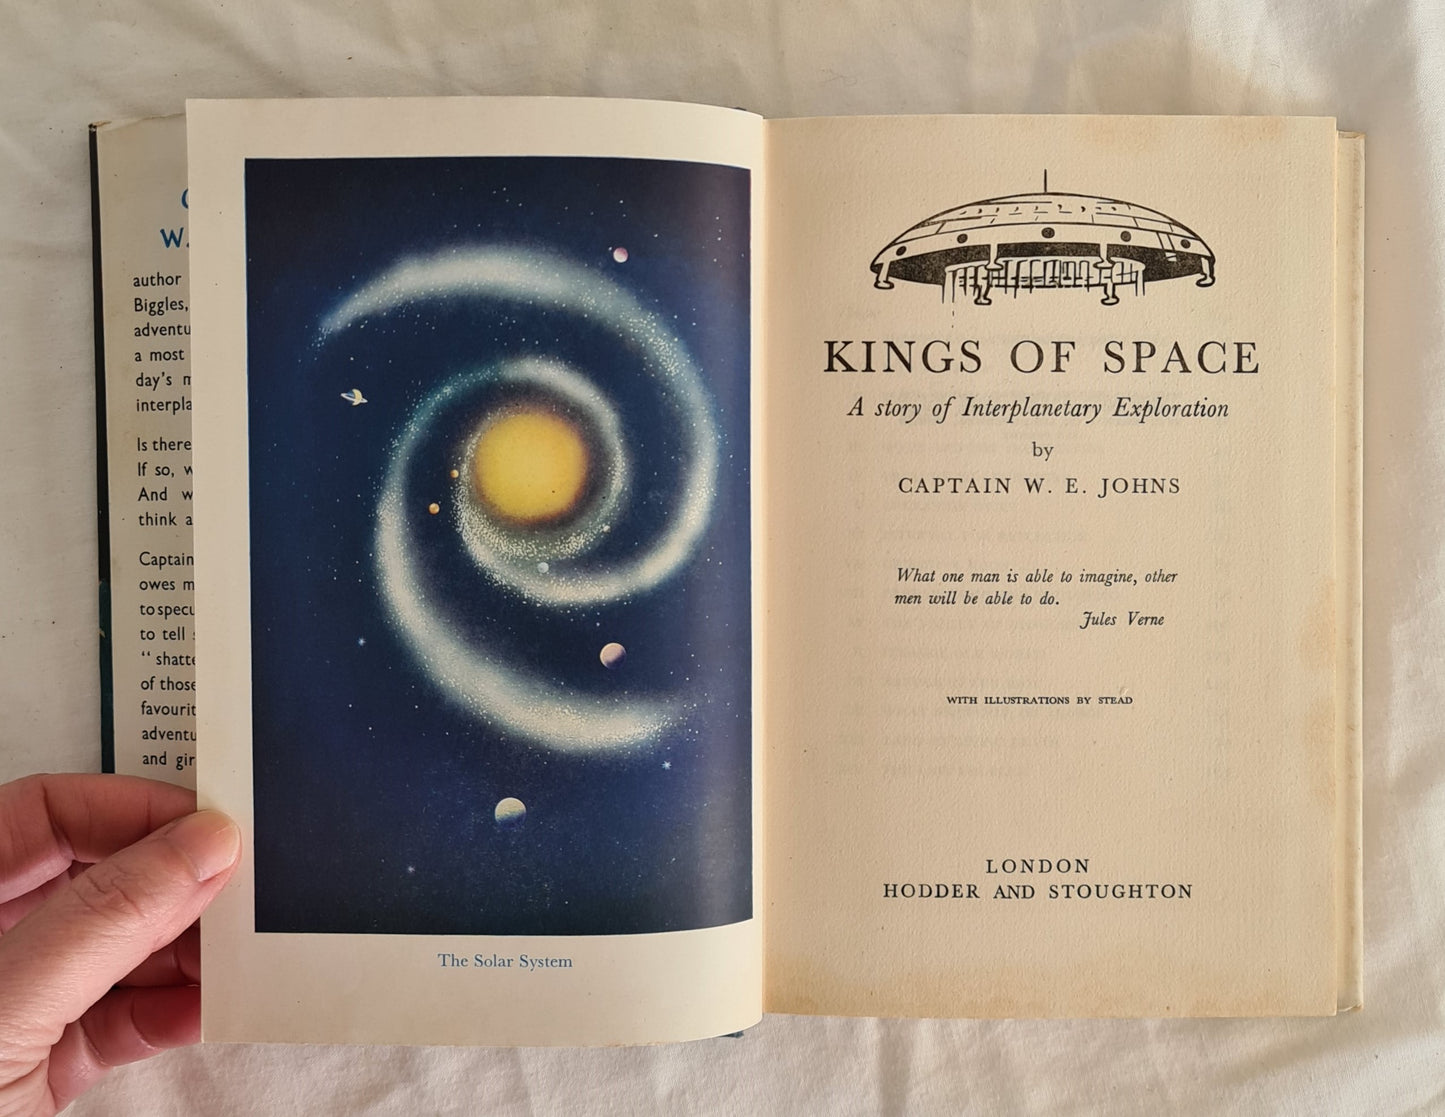 Kings of Space  A story of Interplanetary Exploration  by Captain W. E. Johns